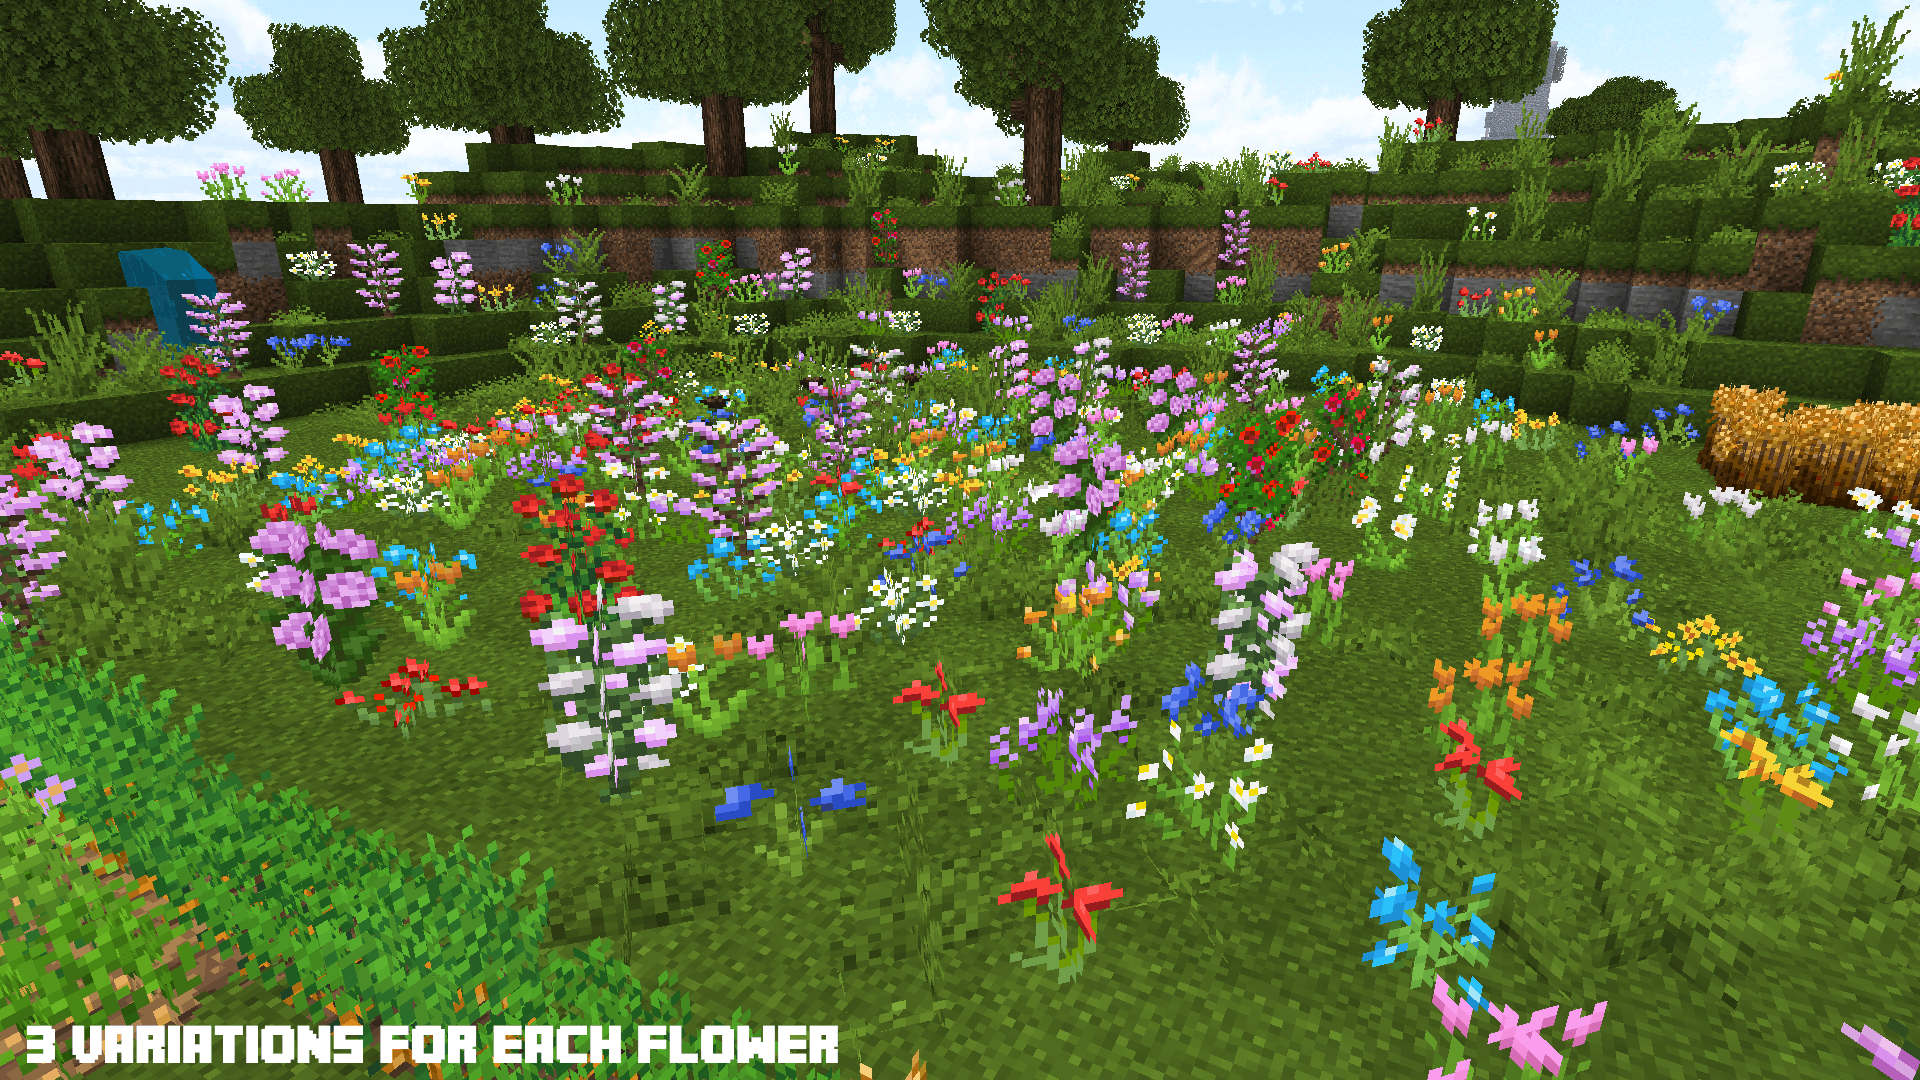 Aesthetic texture pack minecraft